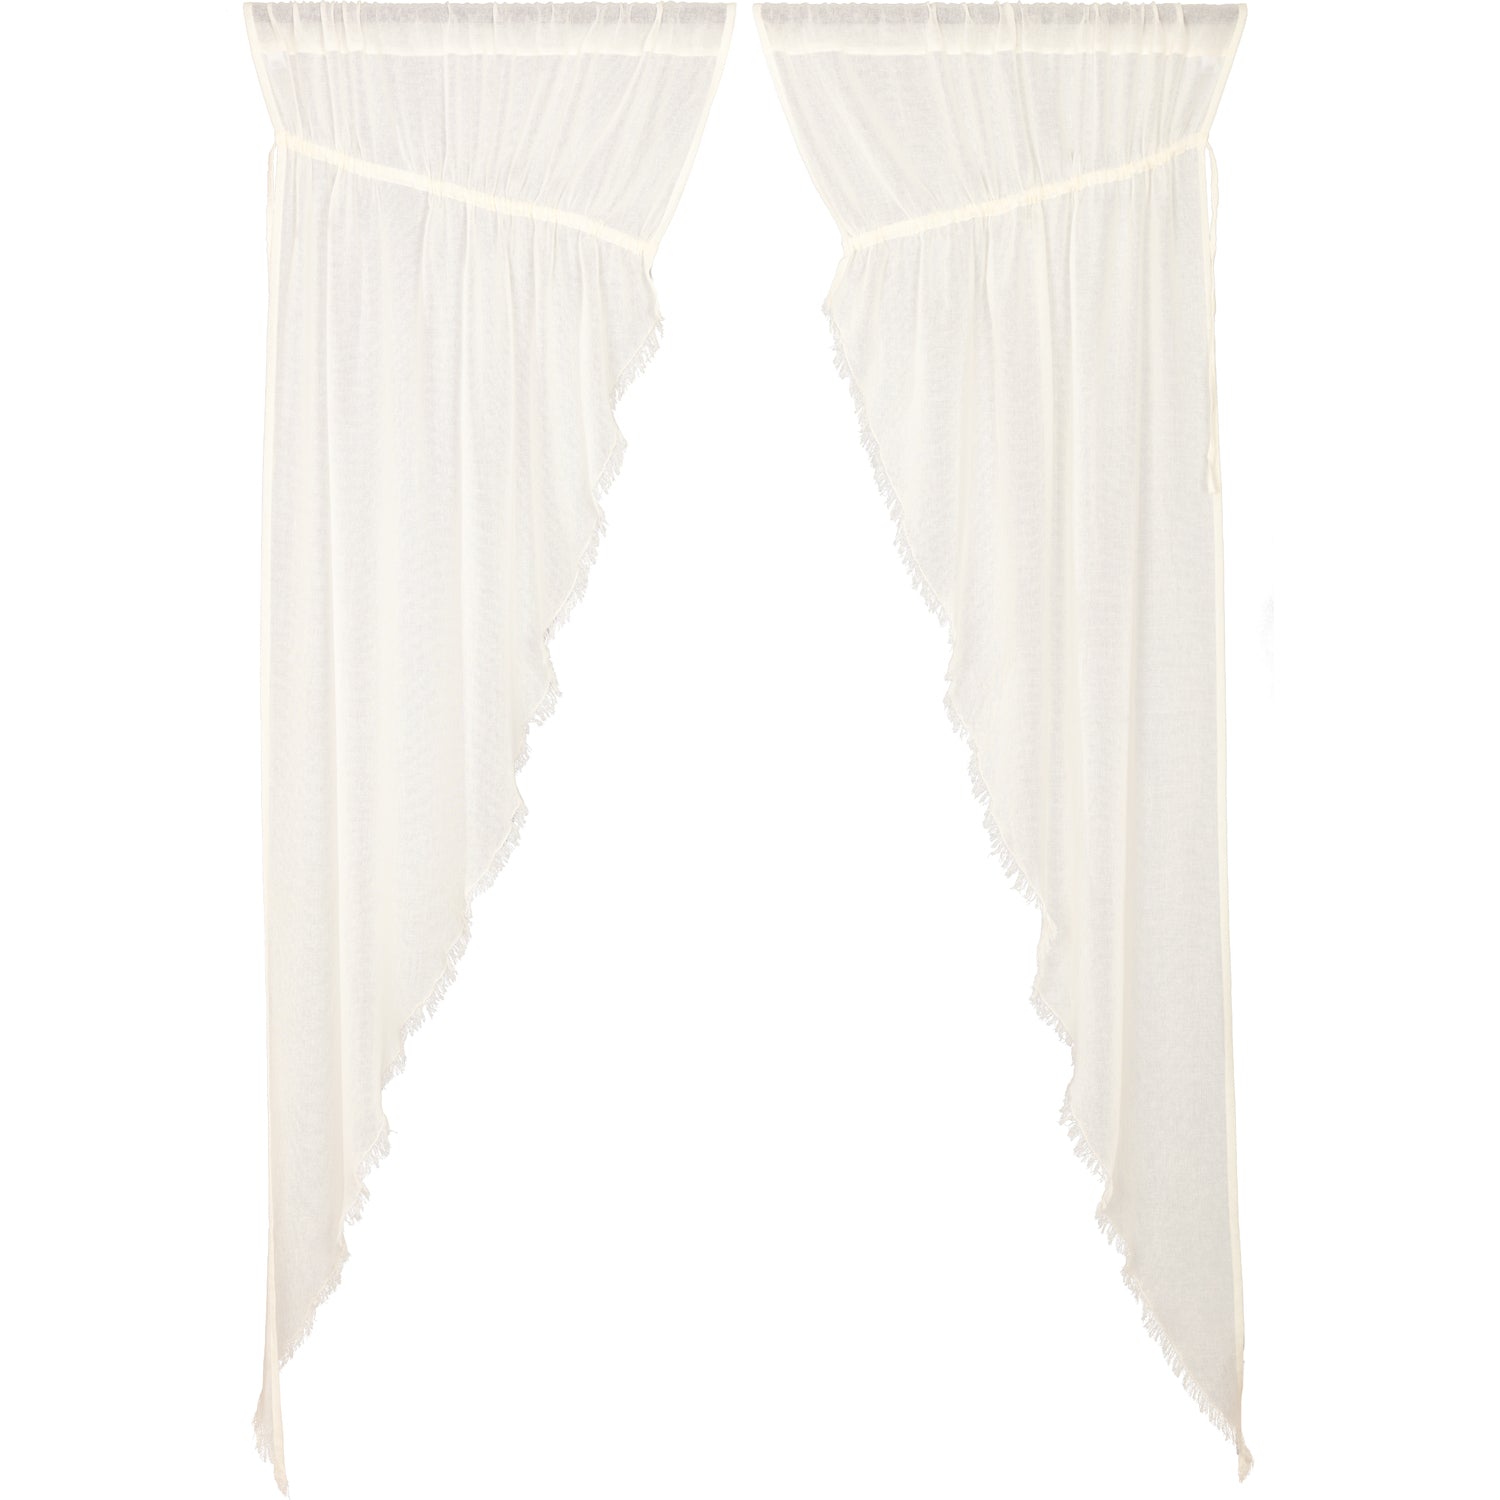 April & Olive Tobacco Cloth Antique White Prairie Long Panel Fringed Set of 2 84x36x18 By VHC Brands